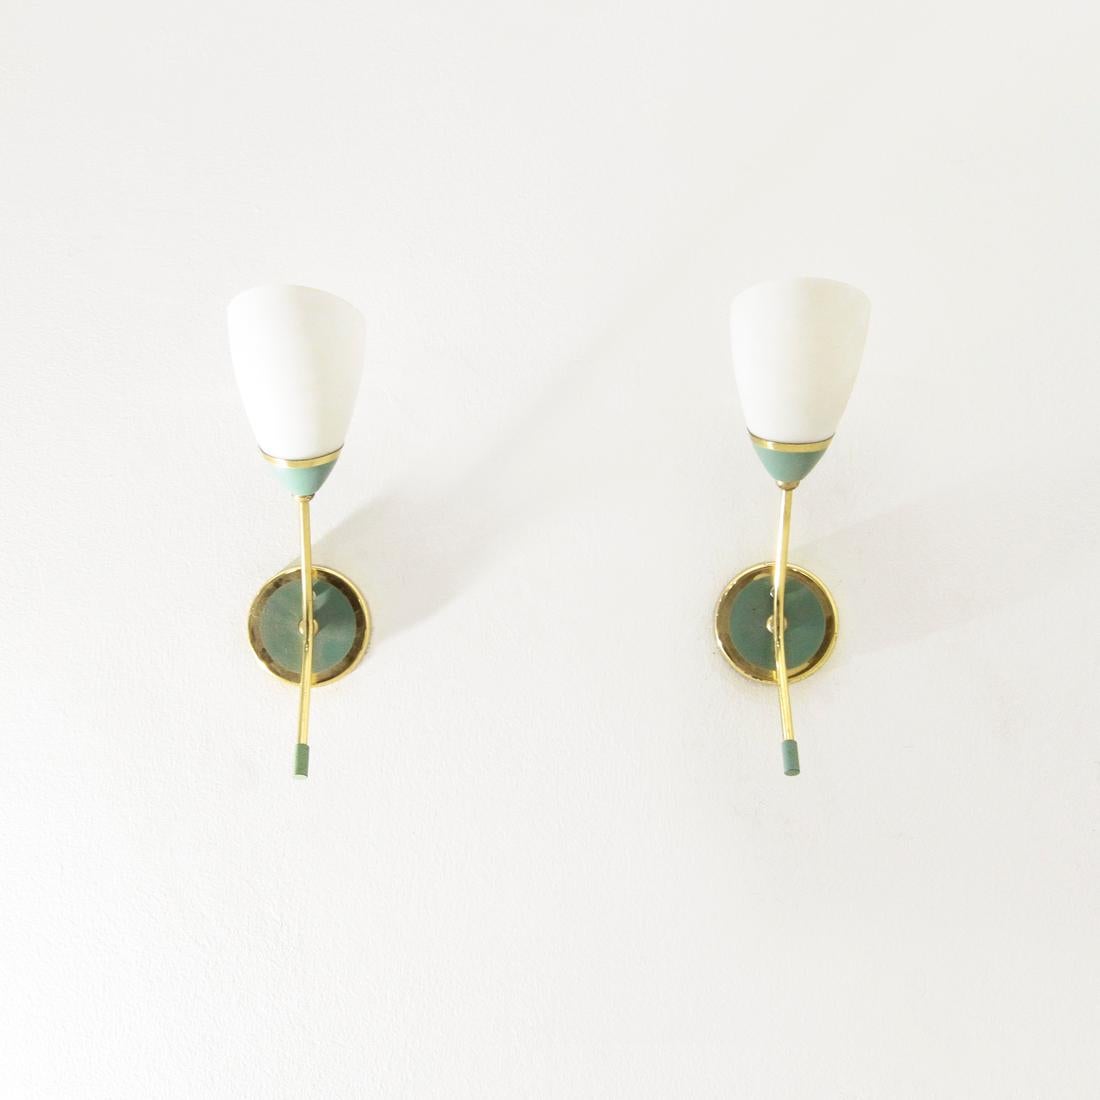 Pair of Italian-made wall lamps produced in the 1950s.
Brass and mint green painted metal structure.
Opal glass diffuser.
Good general condition, some signs of normal use over time over the paintwork.

Dimensions: Length 8 cm, depth 15 cm,